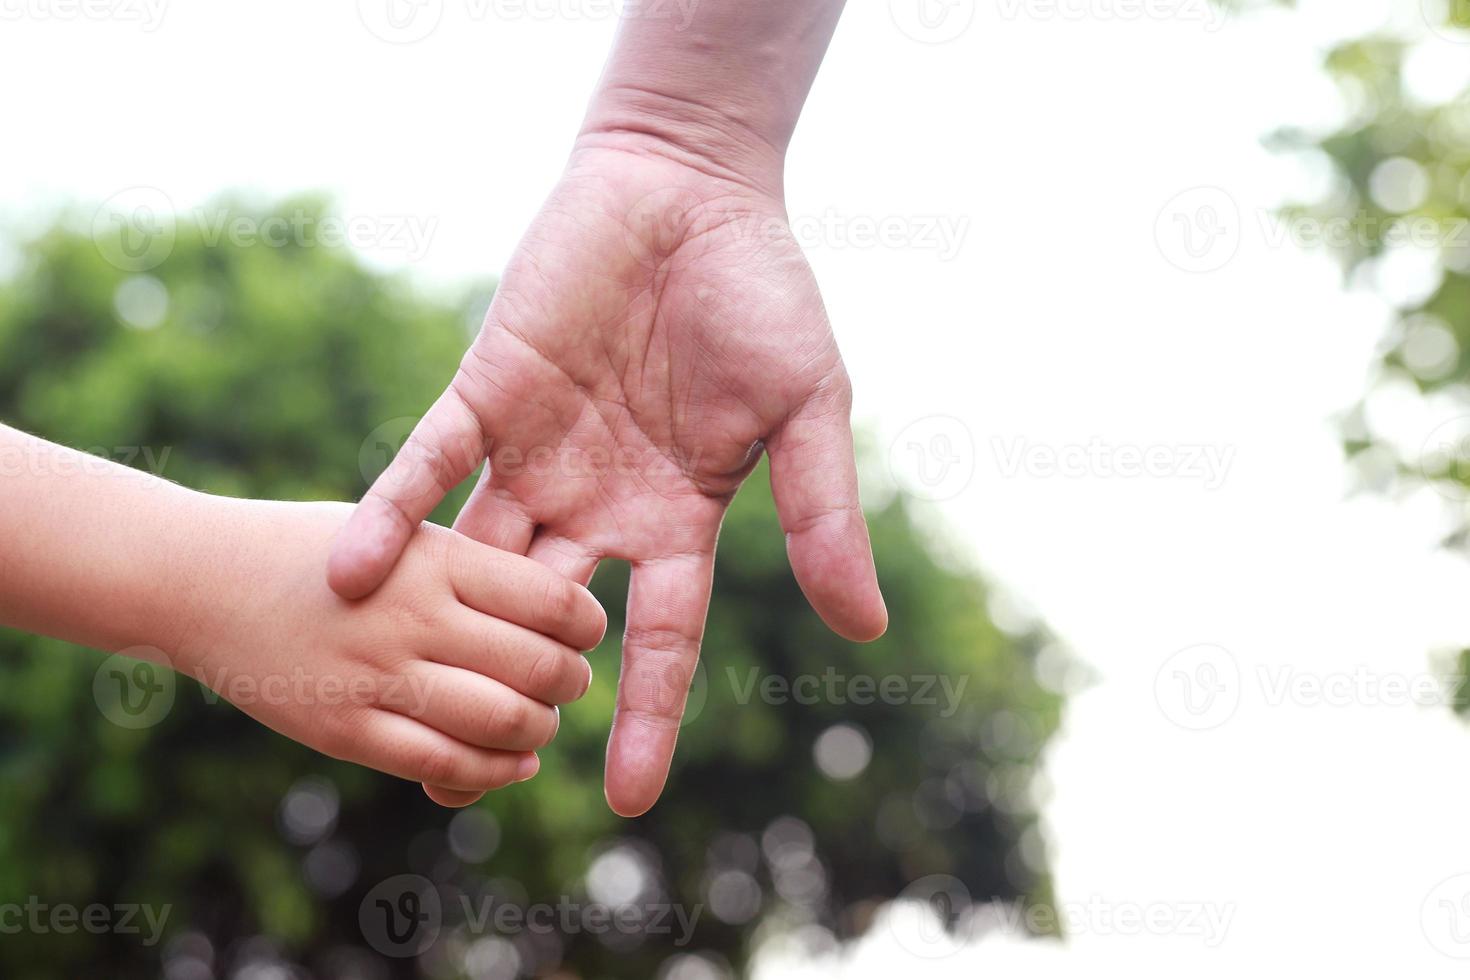 Children's hands with care, concern, warmth of mothers. photo